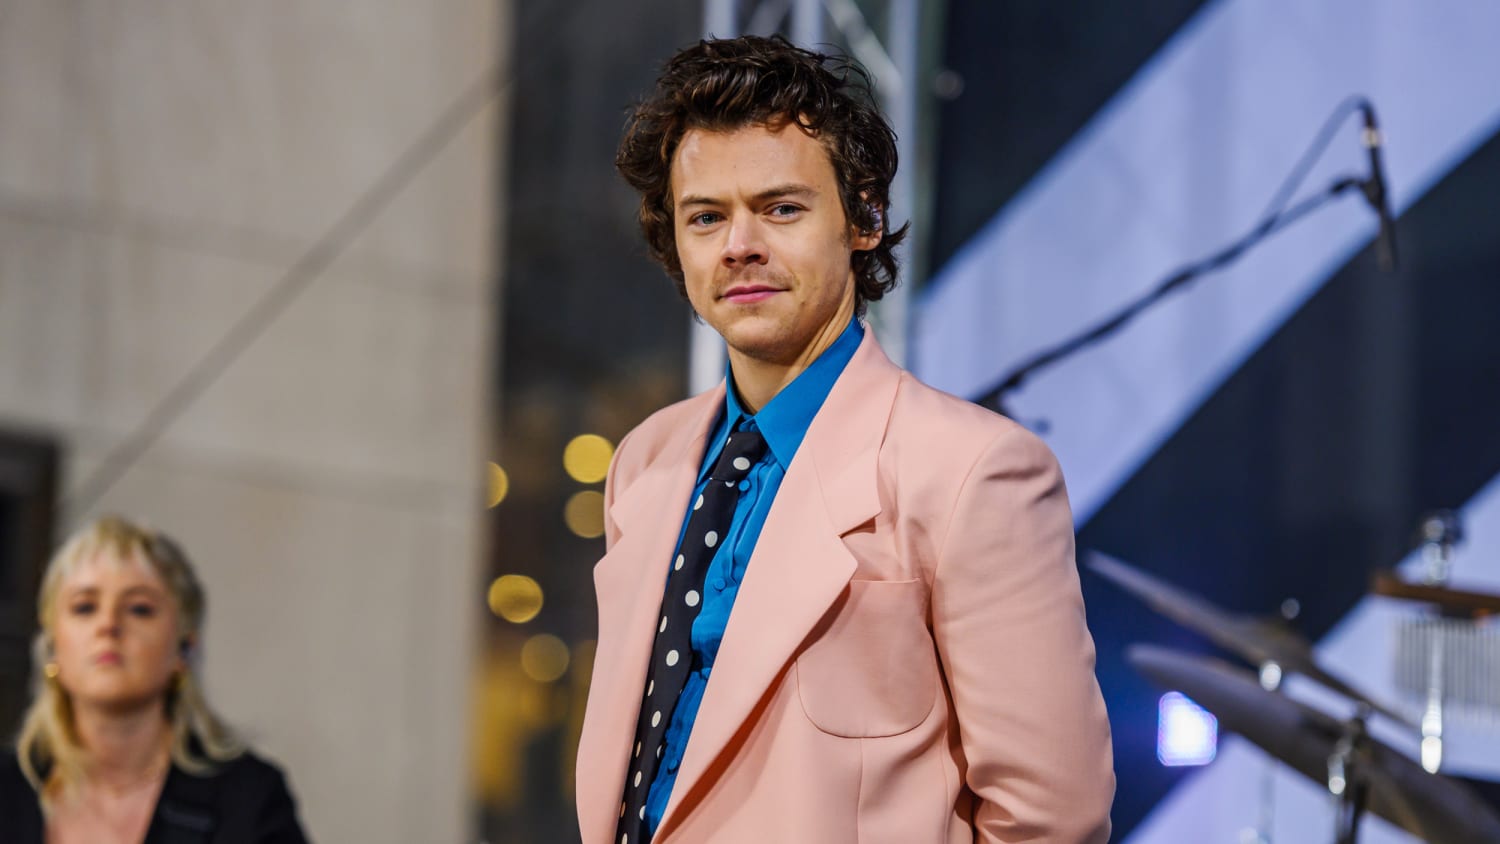 Harry Styles becomes Vogue's first-ever solo male cover star